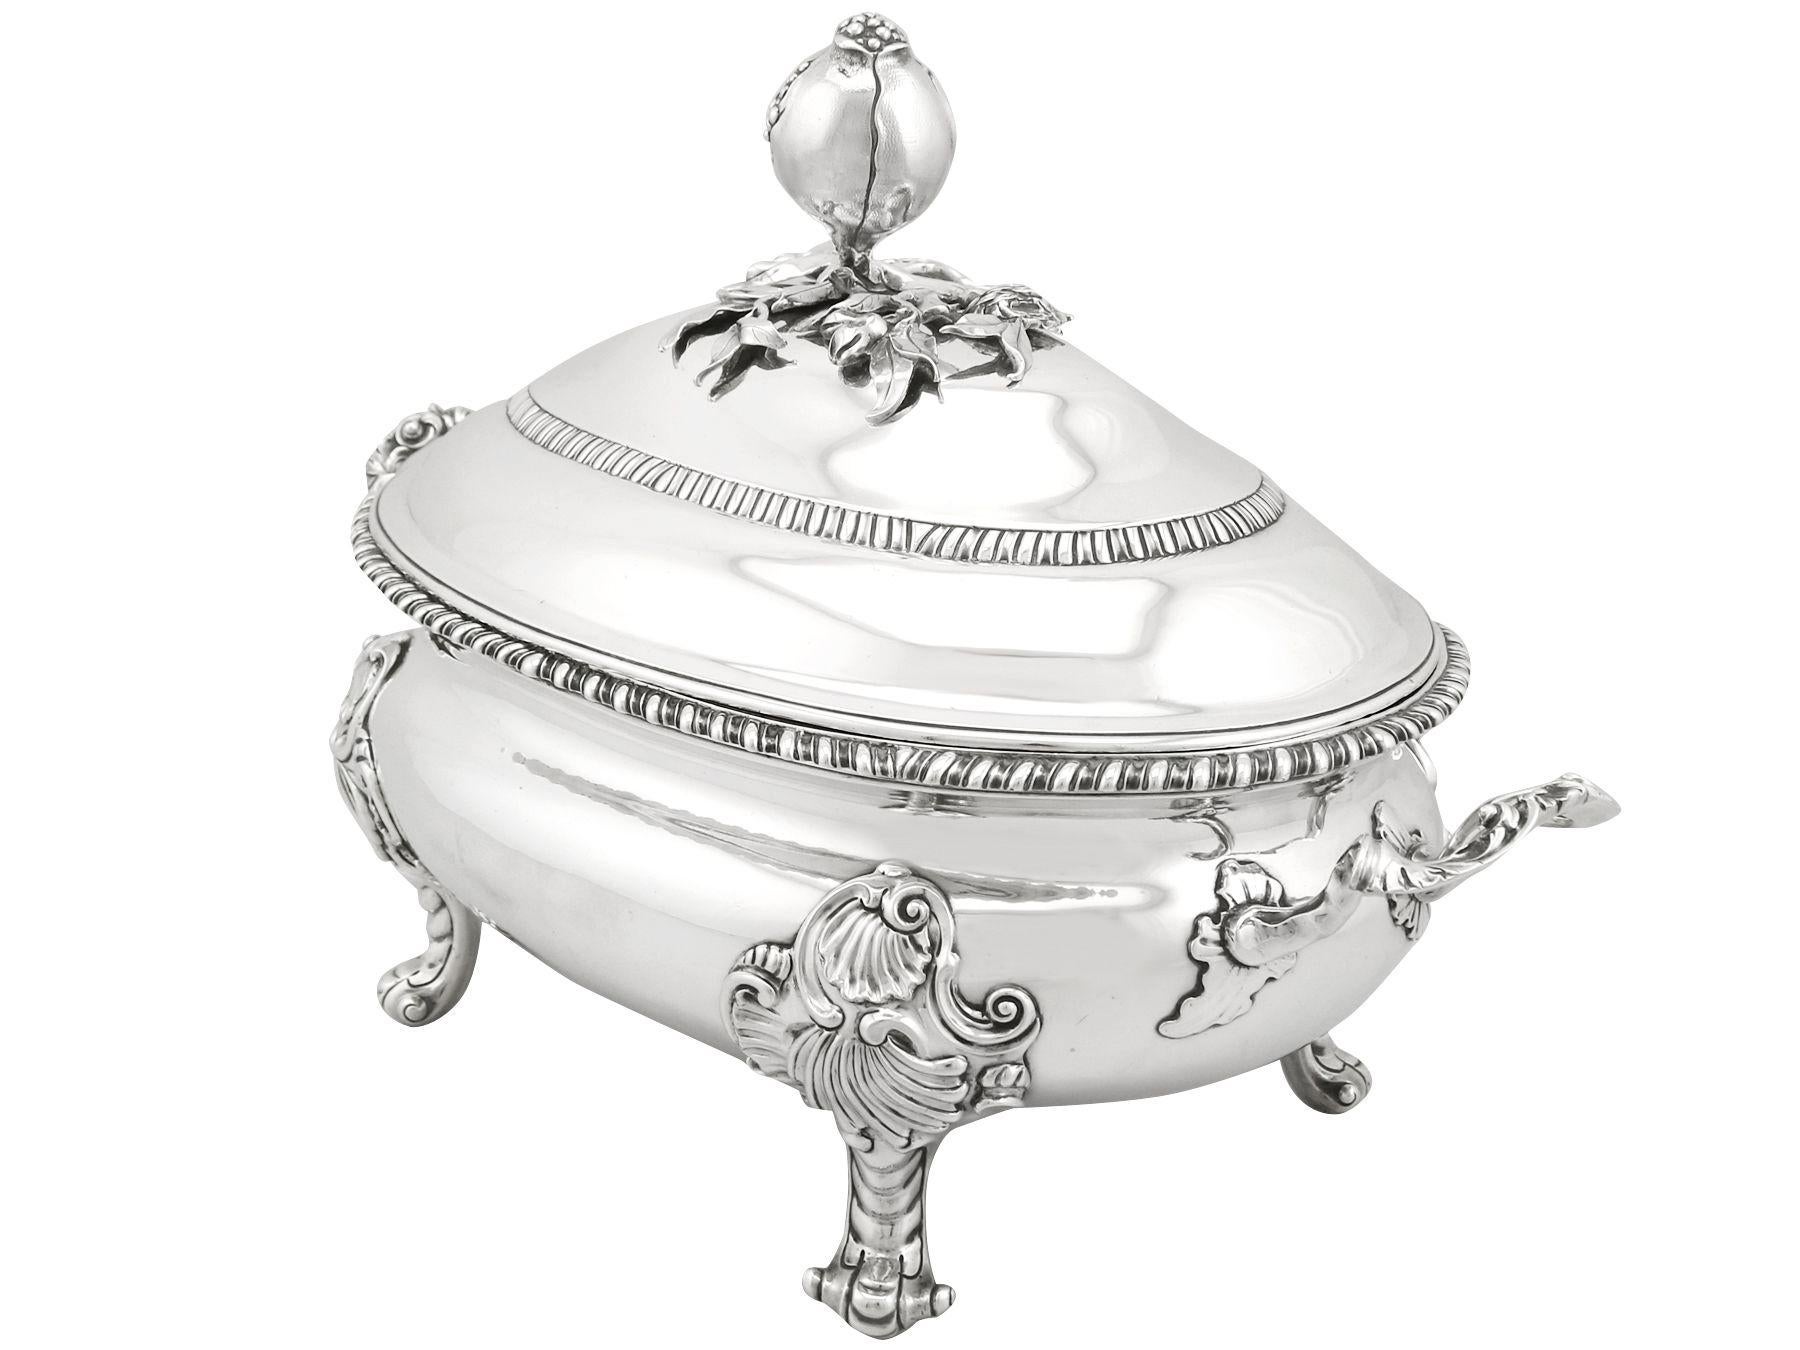 Antique Georgian Sterling Silver Soup Tureen In Excellent Condition For Sale In Jesmond, Newcastle Upon Tyne